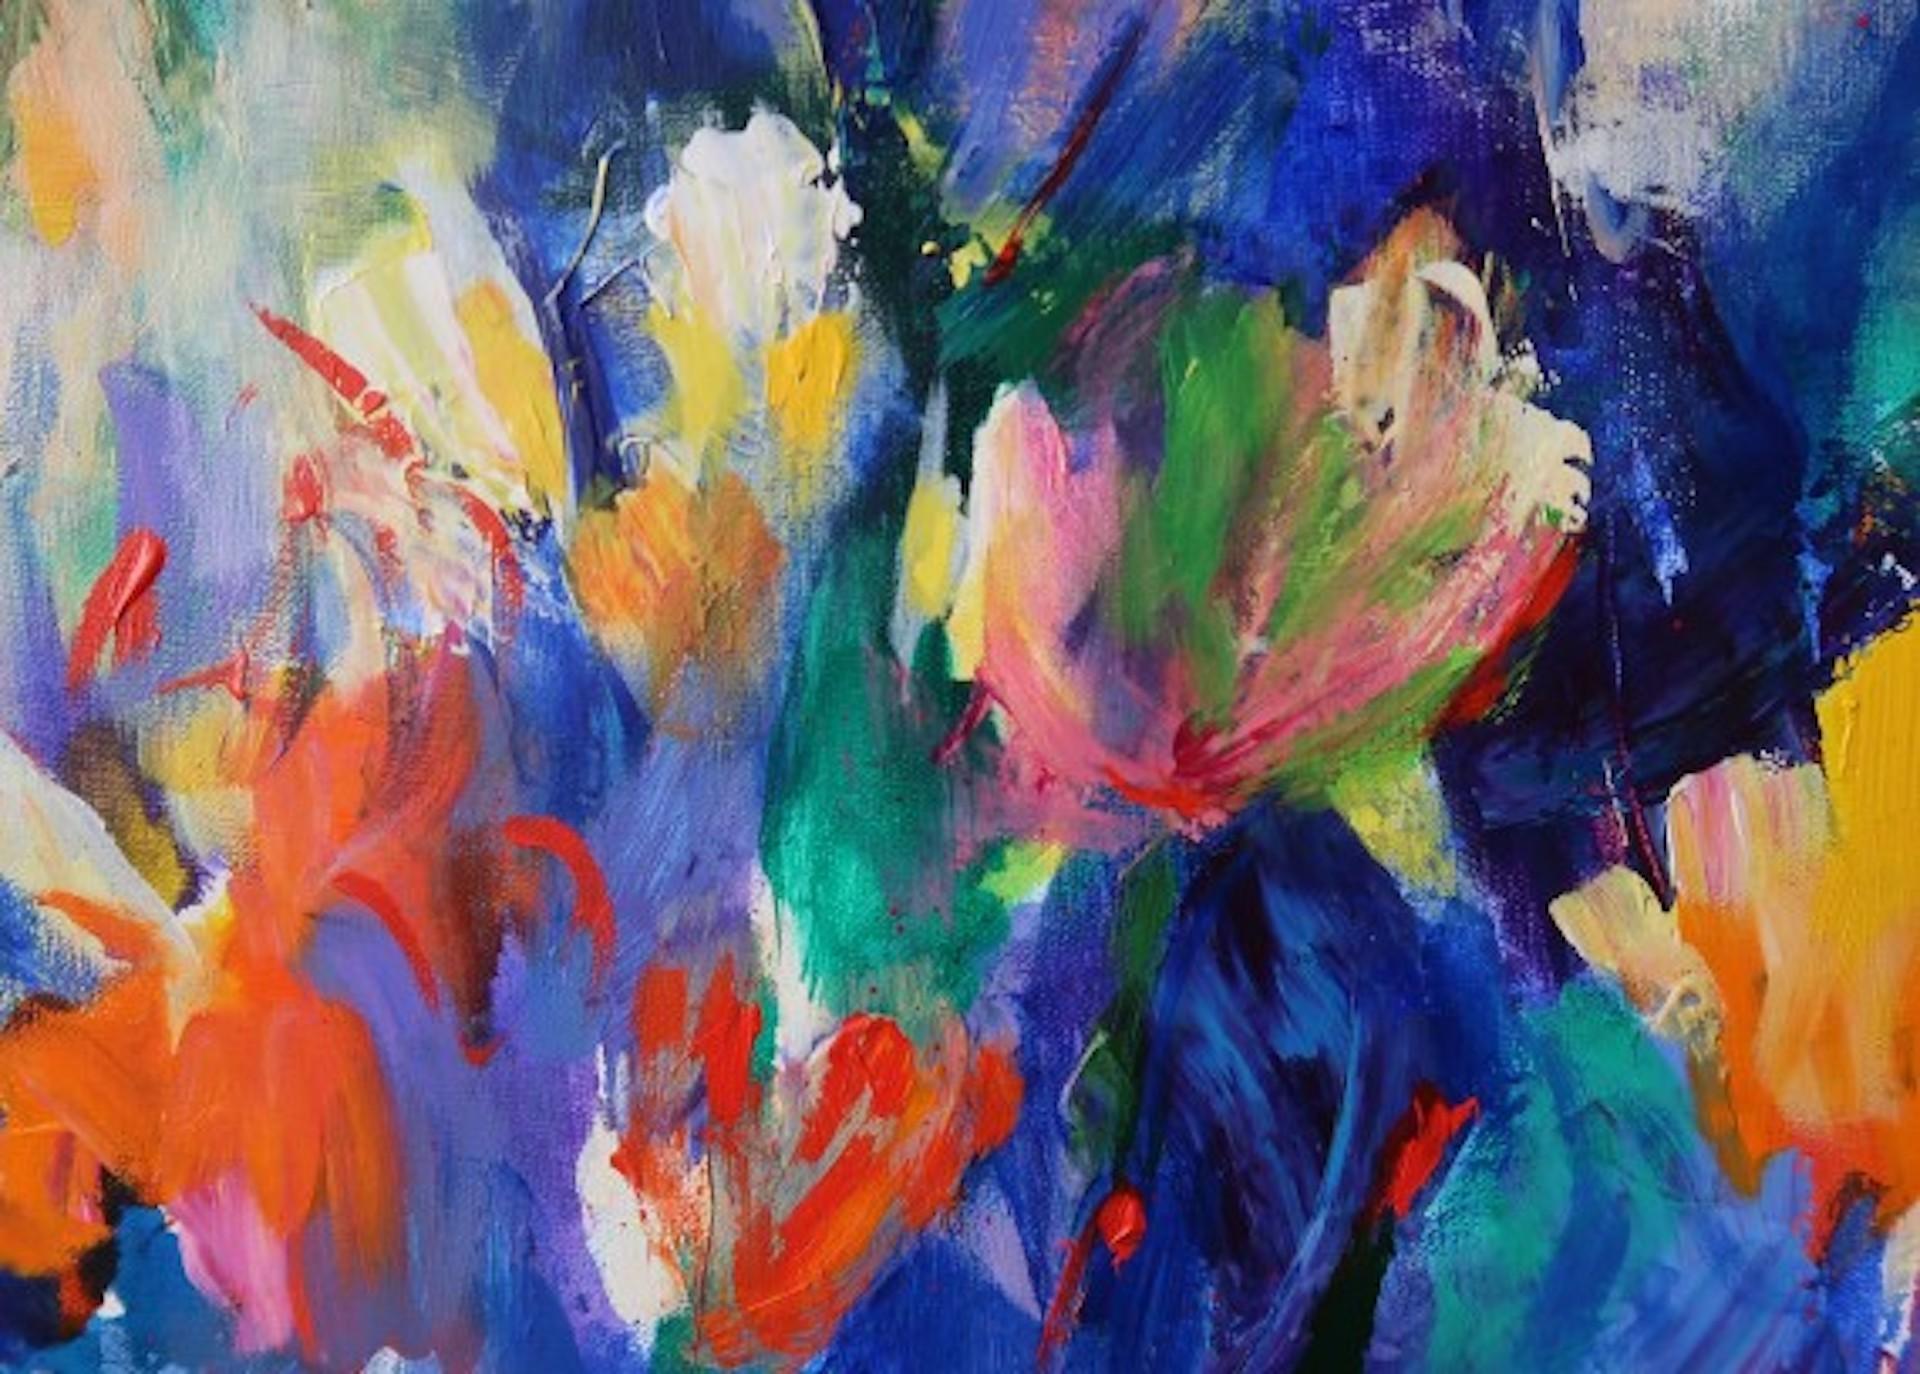 April breeze [2020]
Original
Flowers
Acrylic on canvas
Complete Size of Unframed Work: H:100 cm x W:80 cm x D:2cm
Sold Unframed
Please note that insitu images are purely an indication of how a piece may look

Artist Mary Chaplin was inspired by the